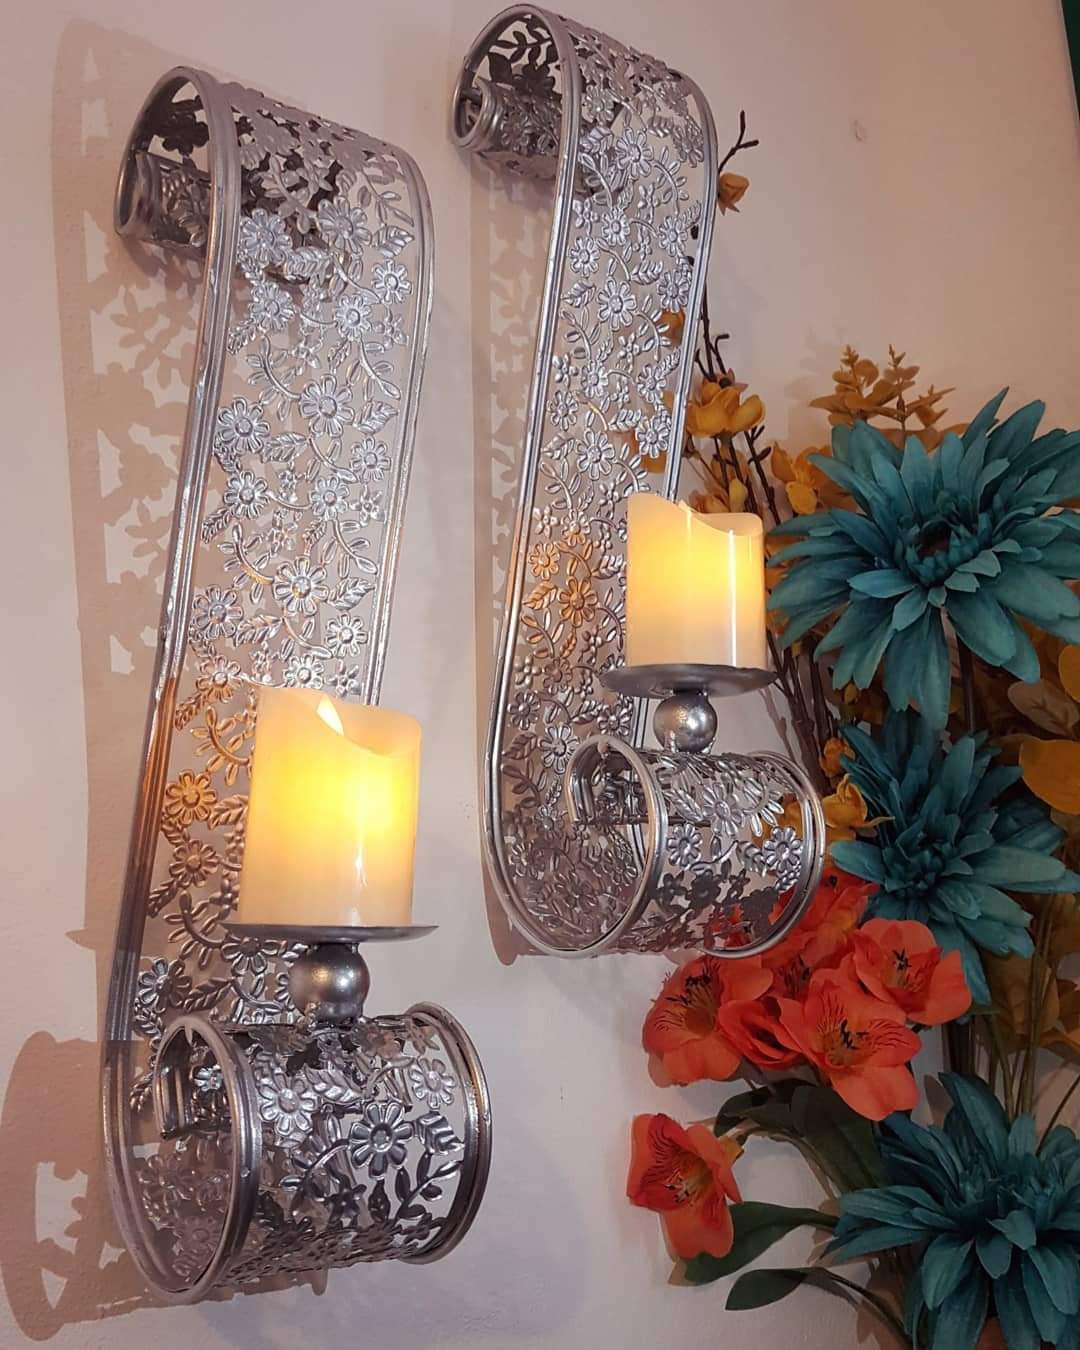 New Metal Scroll Wall Candle Sconces Pair (2 pieces) - Wall Candle Holders - Wall Art - Silver